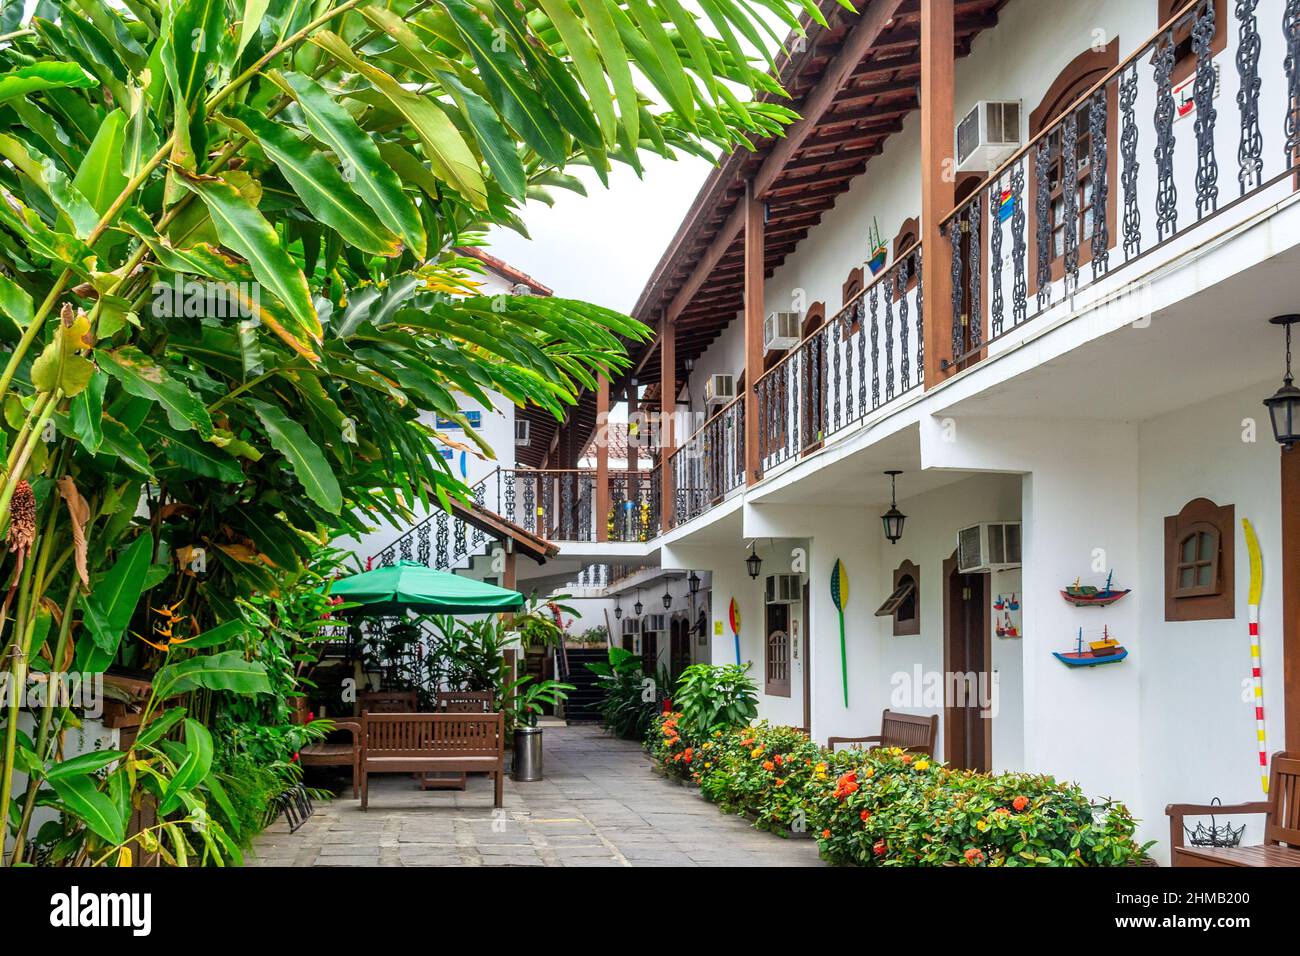 View of rooms and central backyard in the Che Lagarto Hostel. The small business establishment is popular among tourists visiting the town. Stock Photo